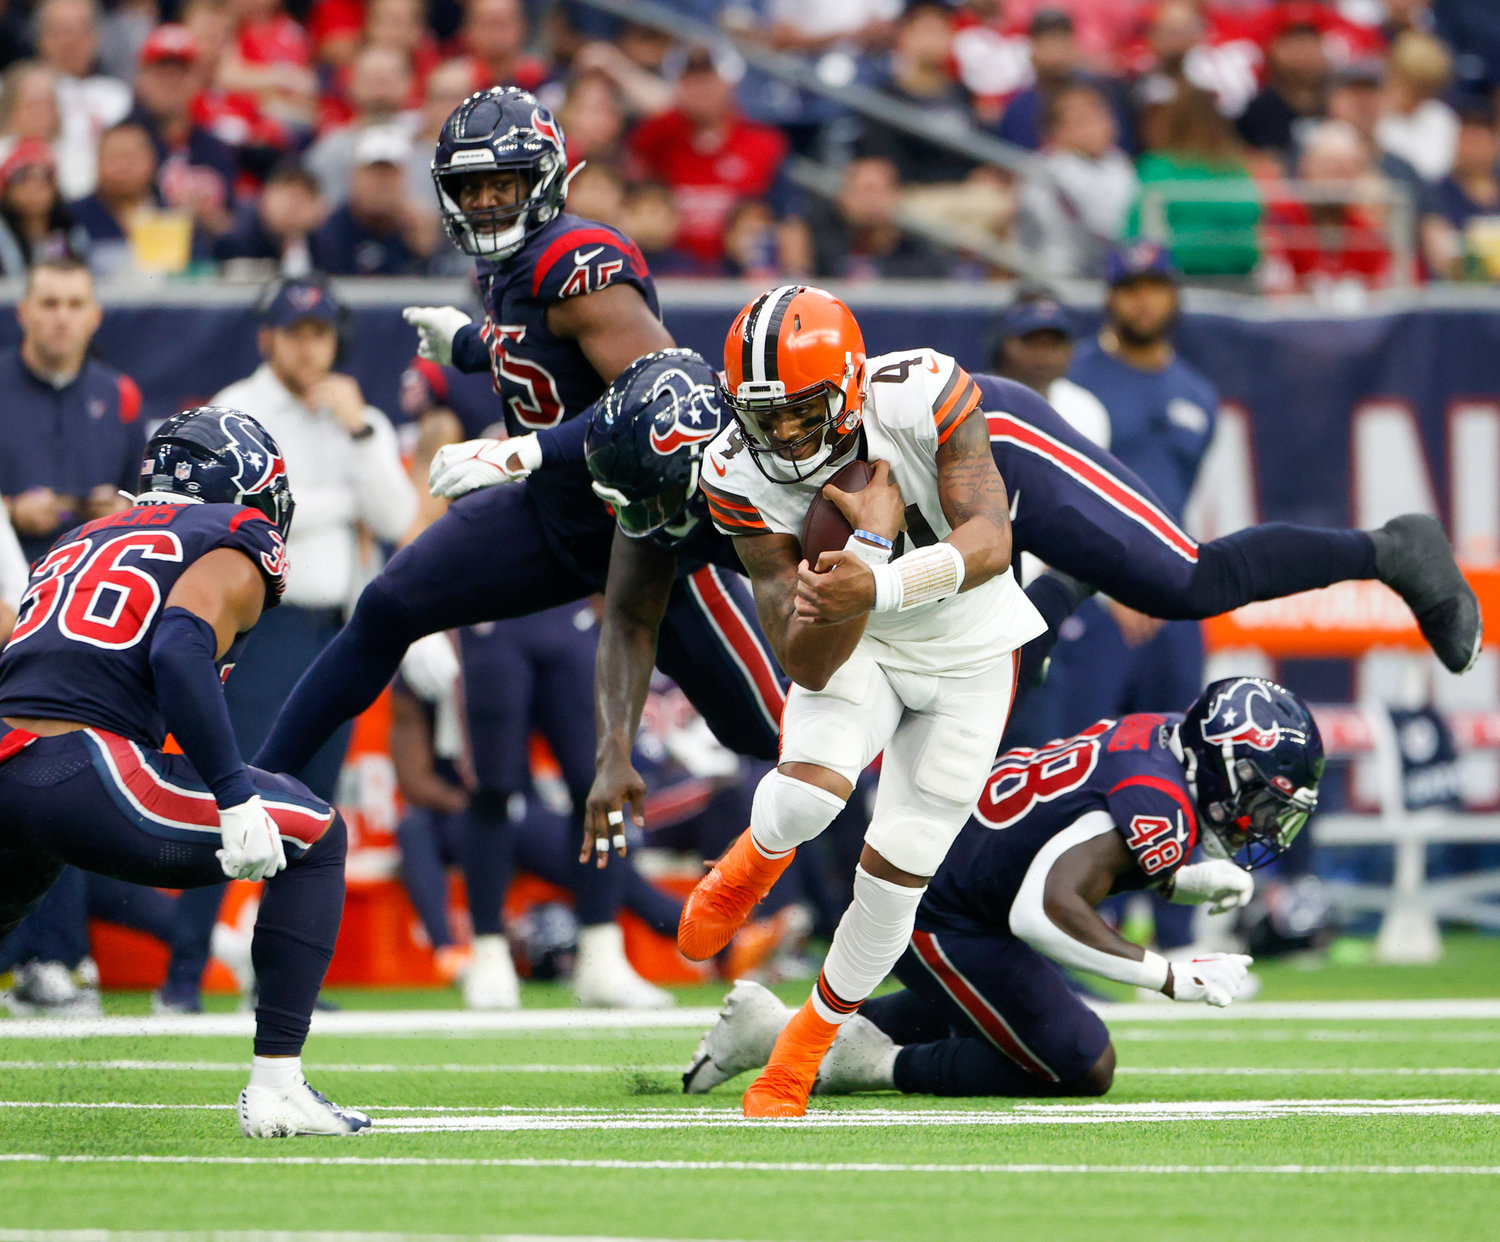 Cleveland Browns quarterback Deshaun Watson (4) avoids defenders while carrying the ball during an NFL game between the Houston Texans and the Cleveland Browns on Dec. 4, 2022, in Houston. The Browns won, 27-14.